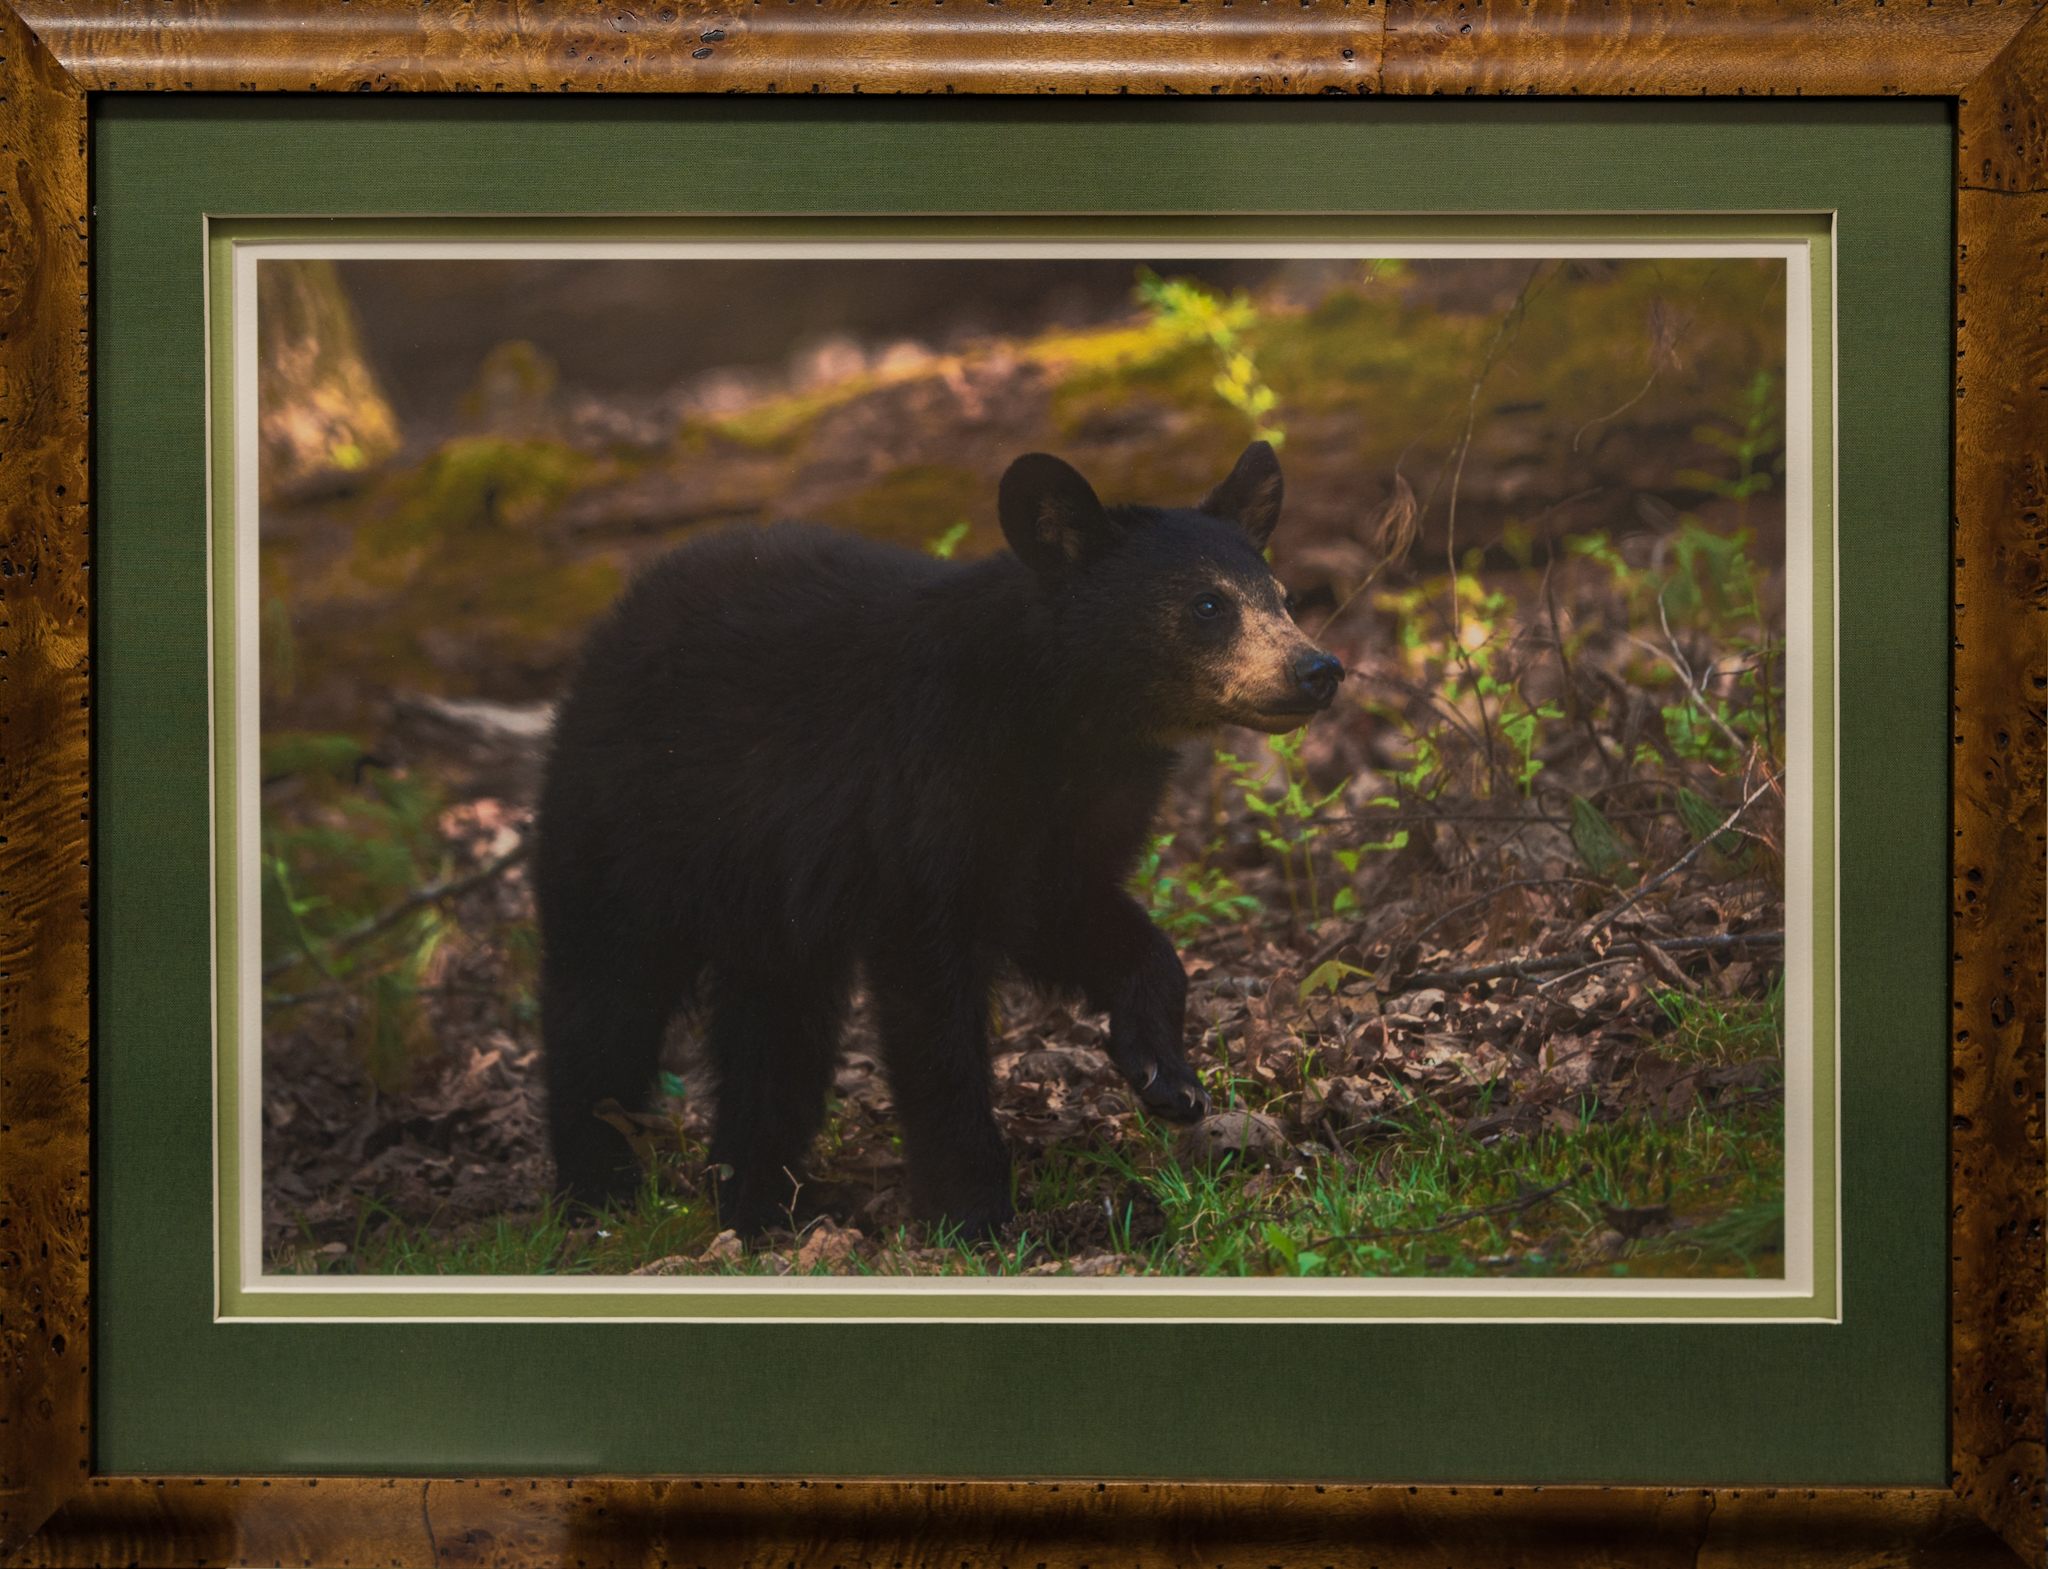 "Baby bear has big claws" on a forest green matte with gray and white inner edges and a non-uniformly-colored brown frame.